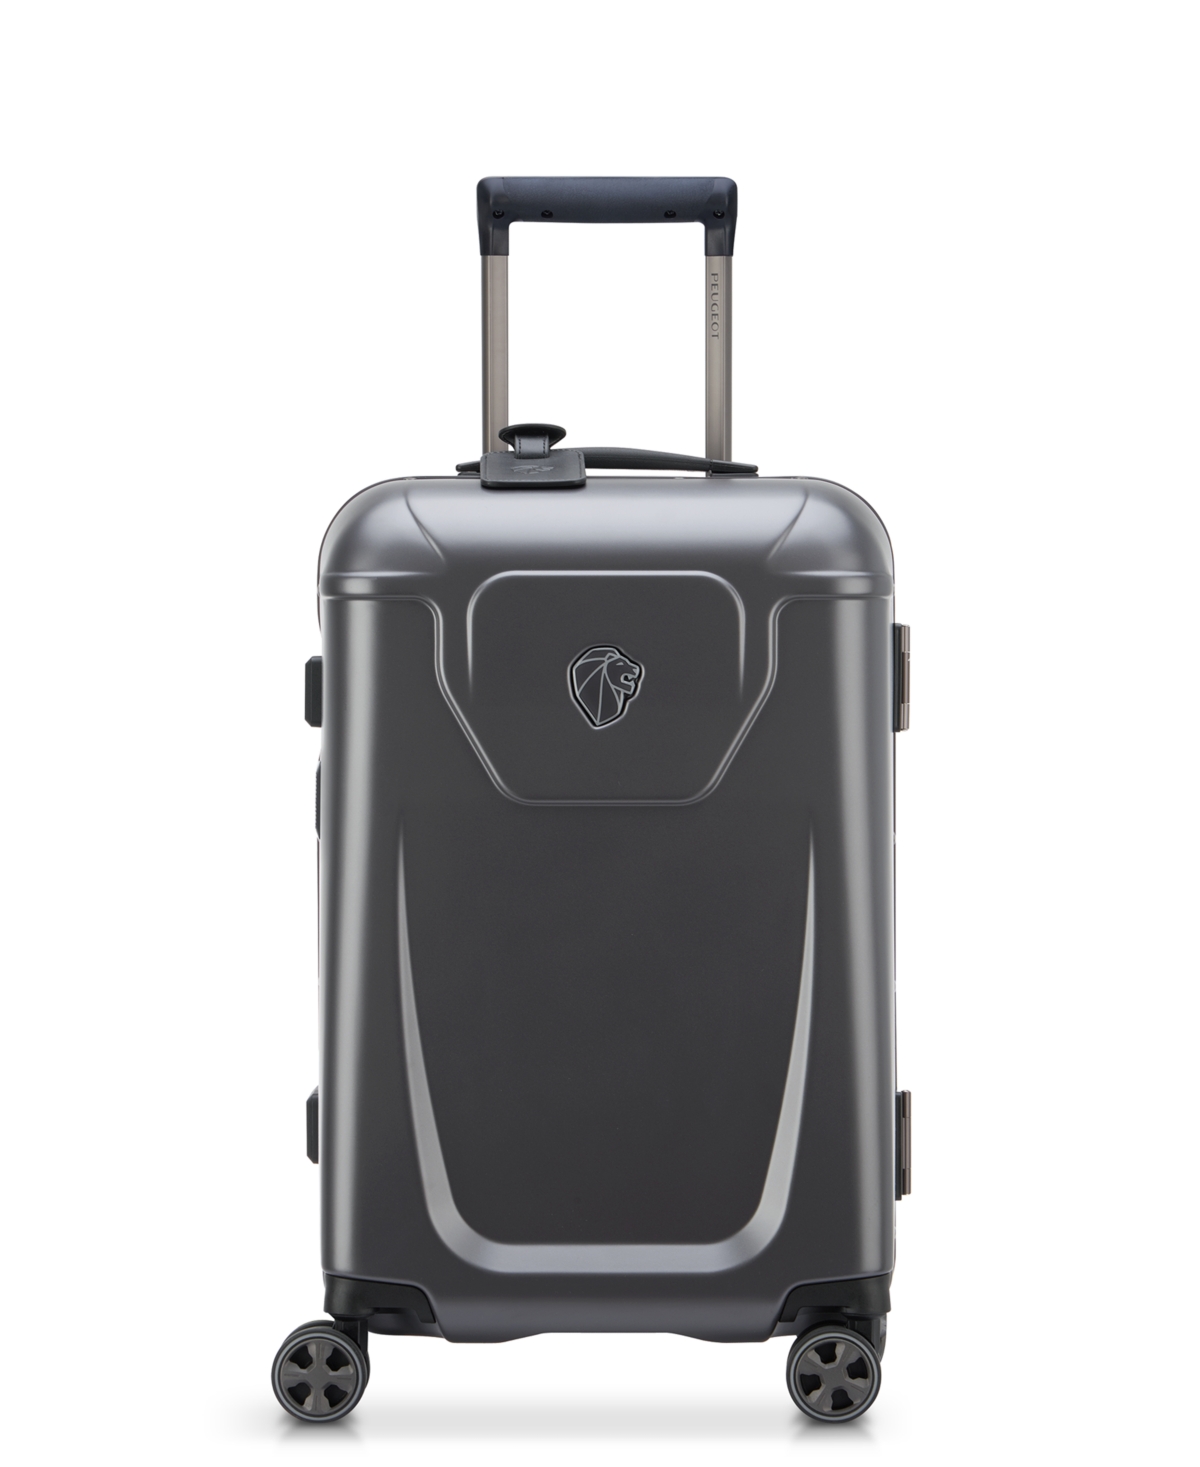 Voyages 19" Carry-On Spinner Suitcase - Anthracite